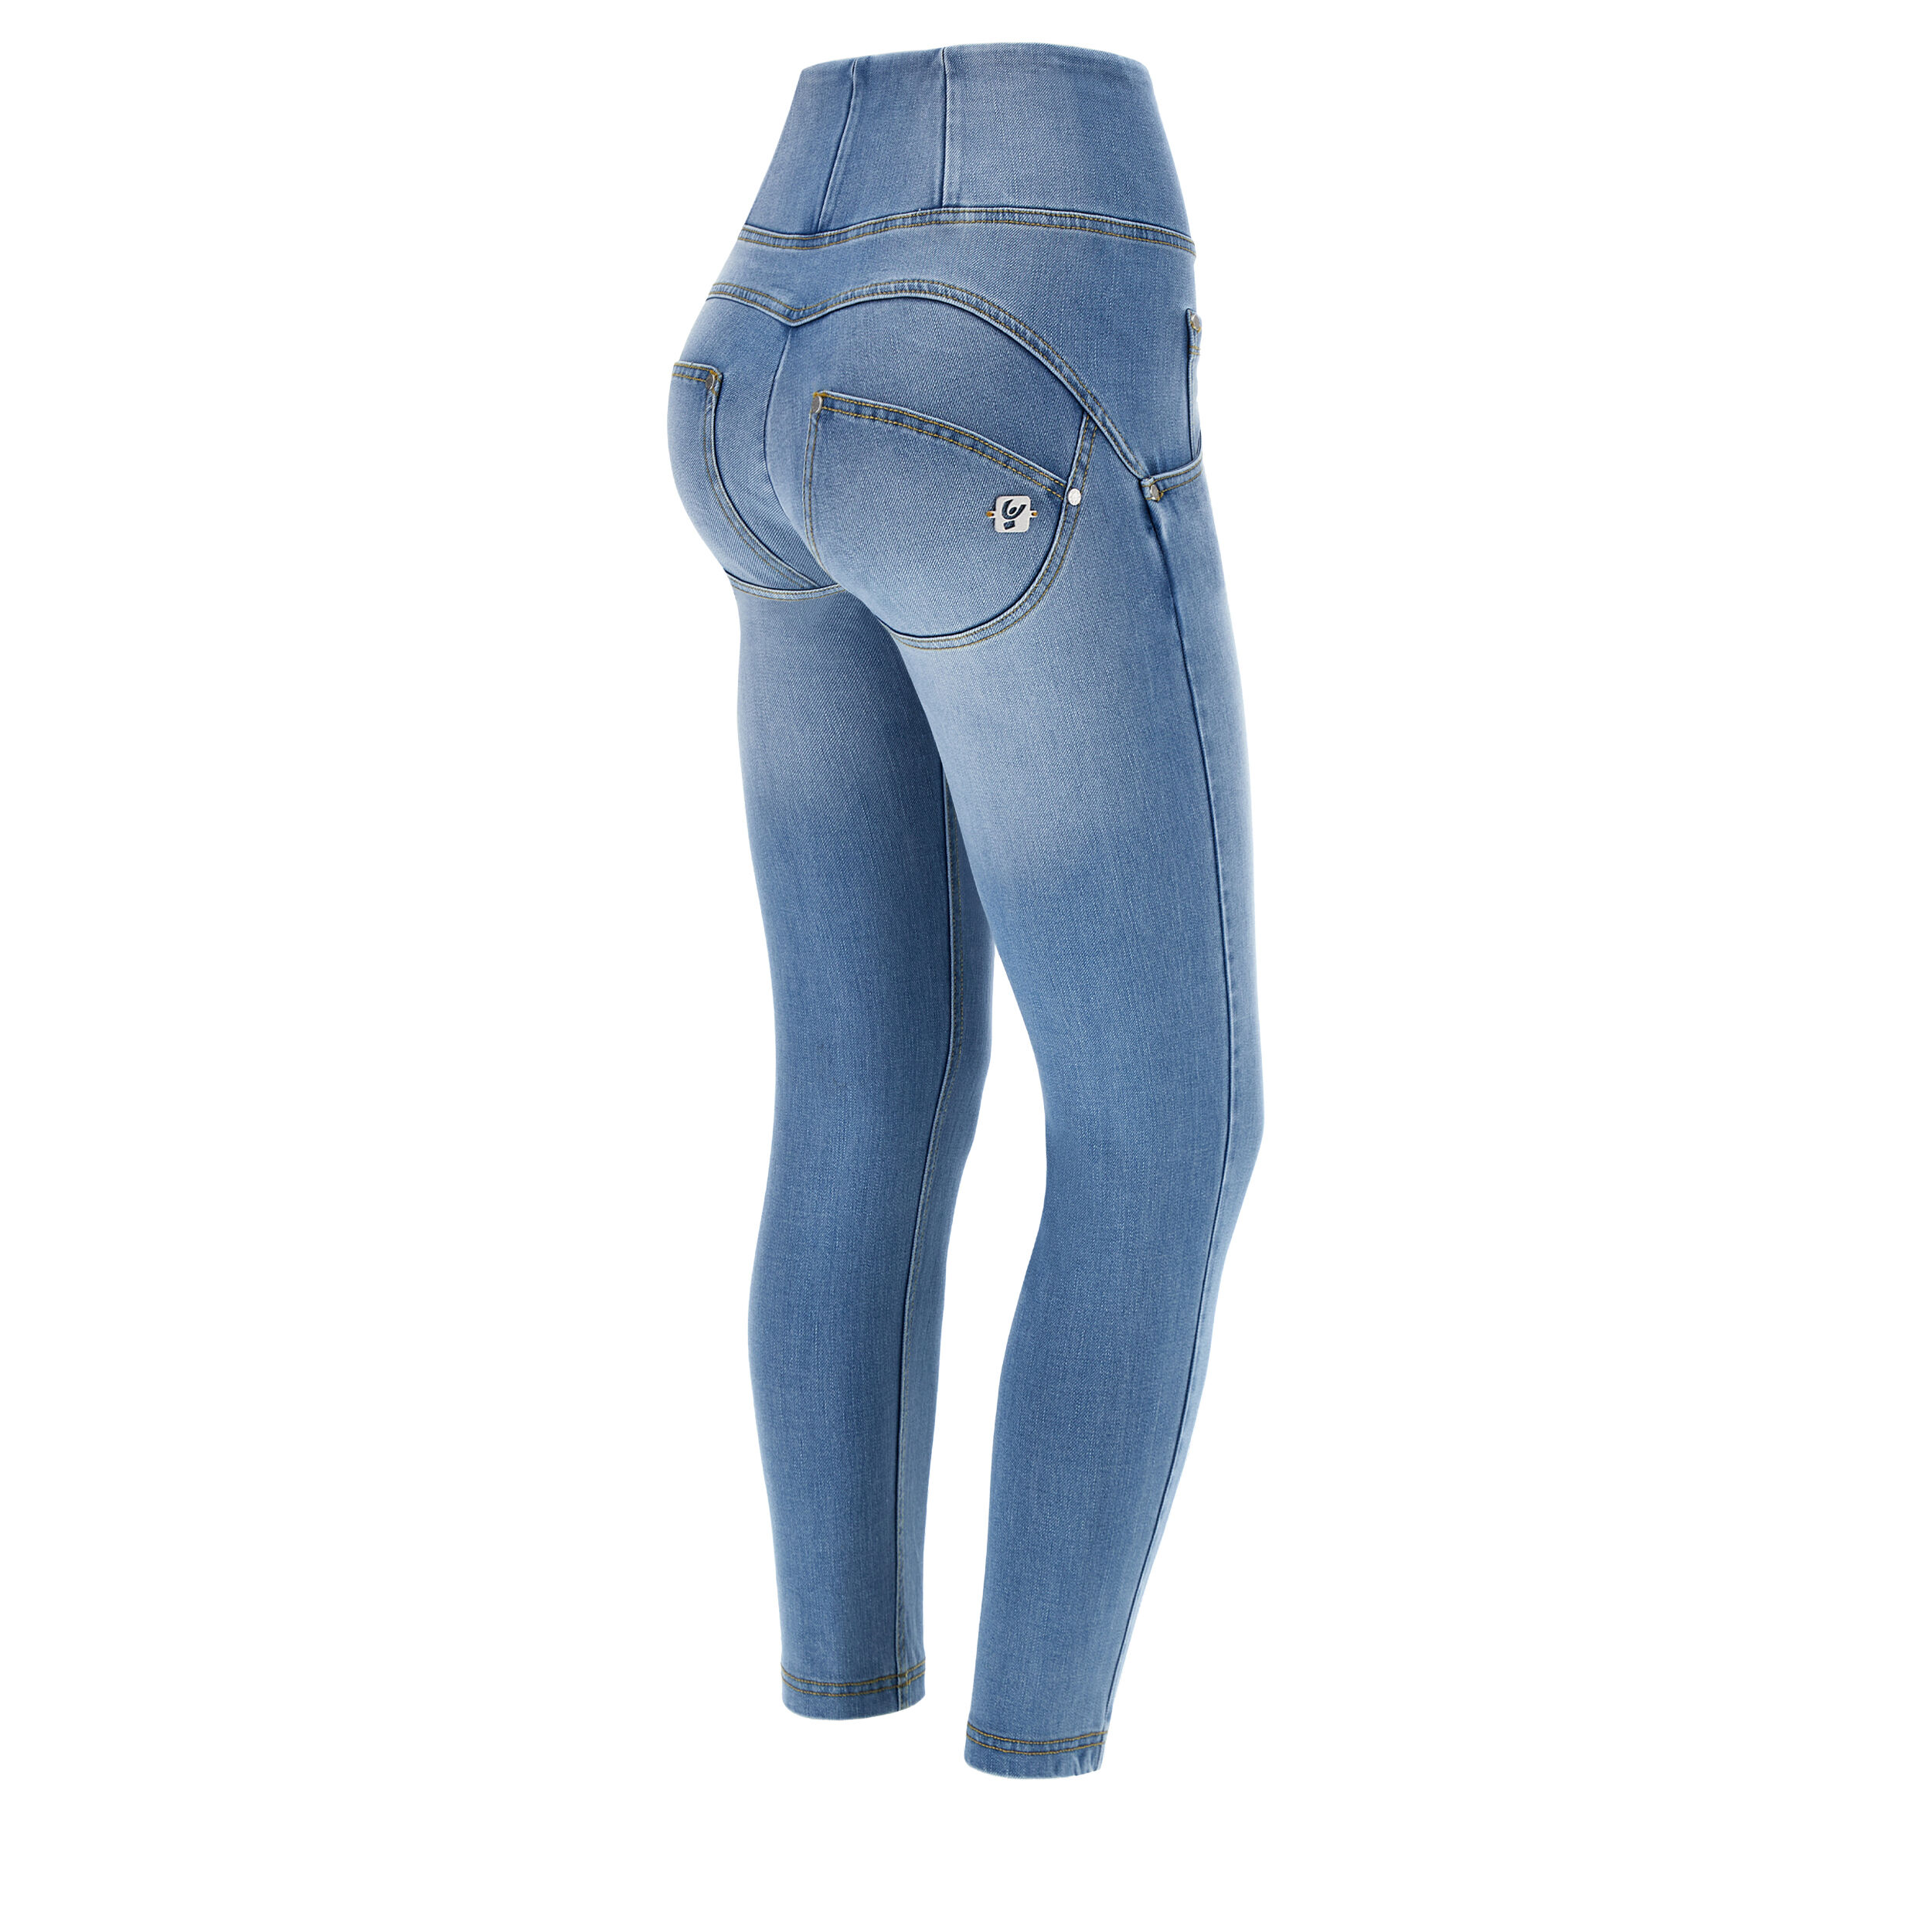 Freddy Jeans push up WR.UP® 7/8 superskinny effetto used vita alta Jeans Chiaro-Cuciture Gialle Donna Large